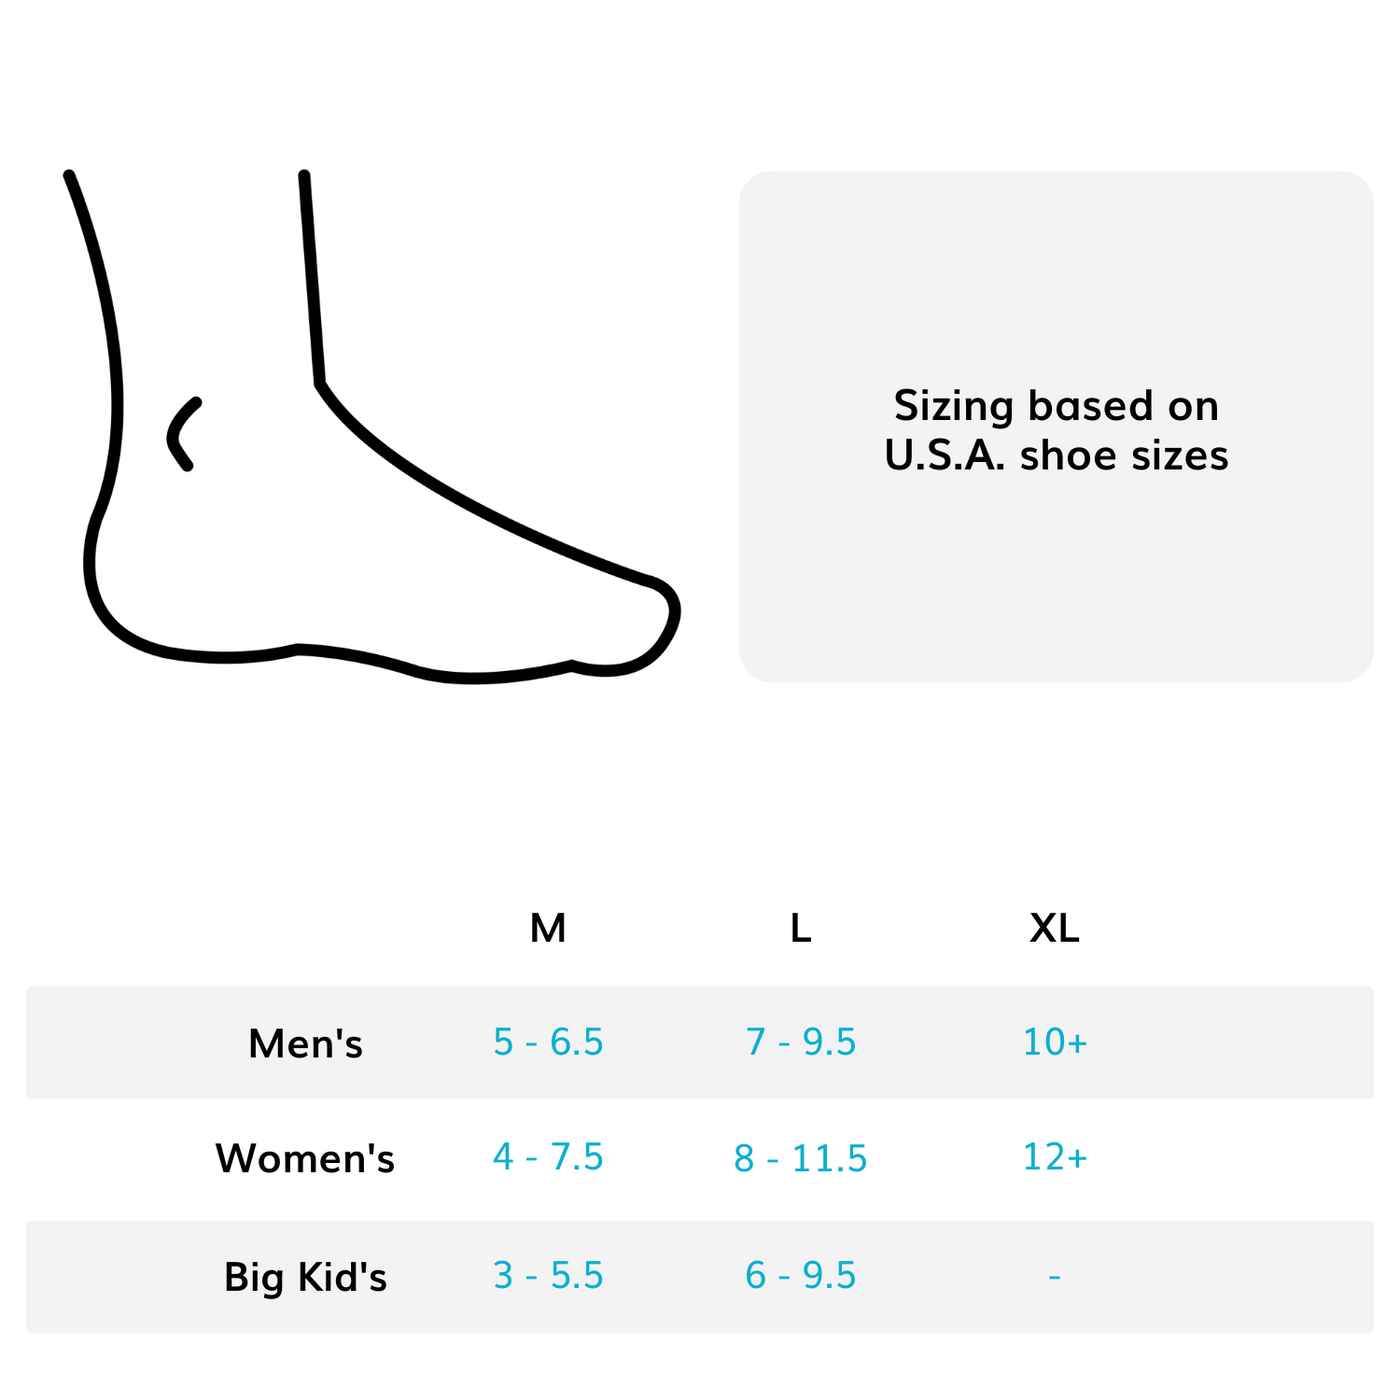 the sizing for our plantar fasciitis heel cups come in sizes S-L